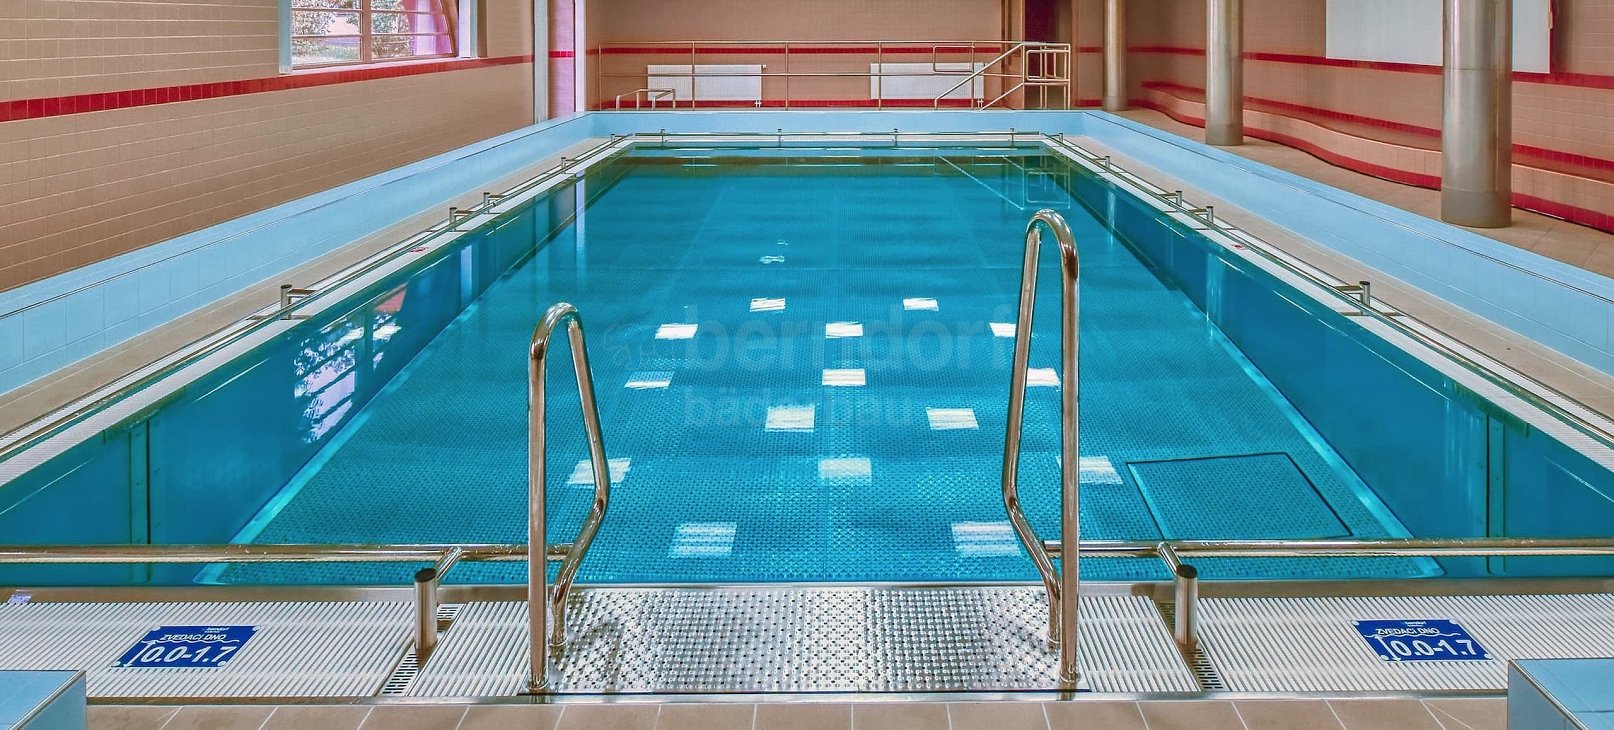 Rehabilitation stainless steel pool with movable floor Tloskov